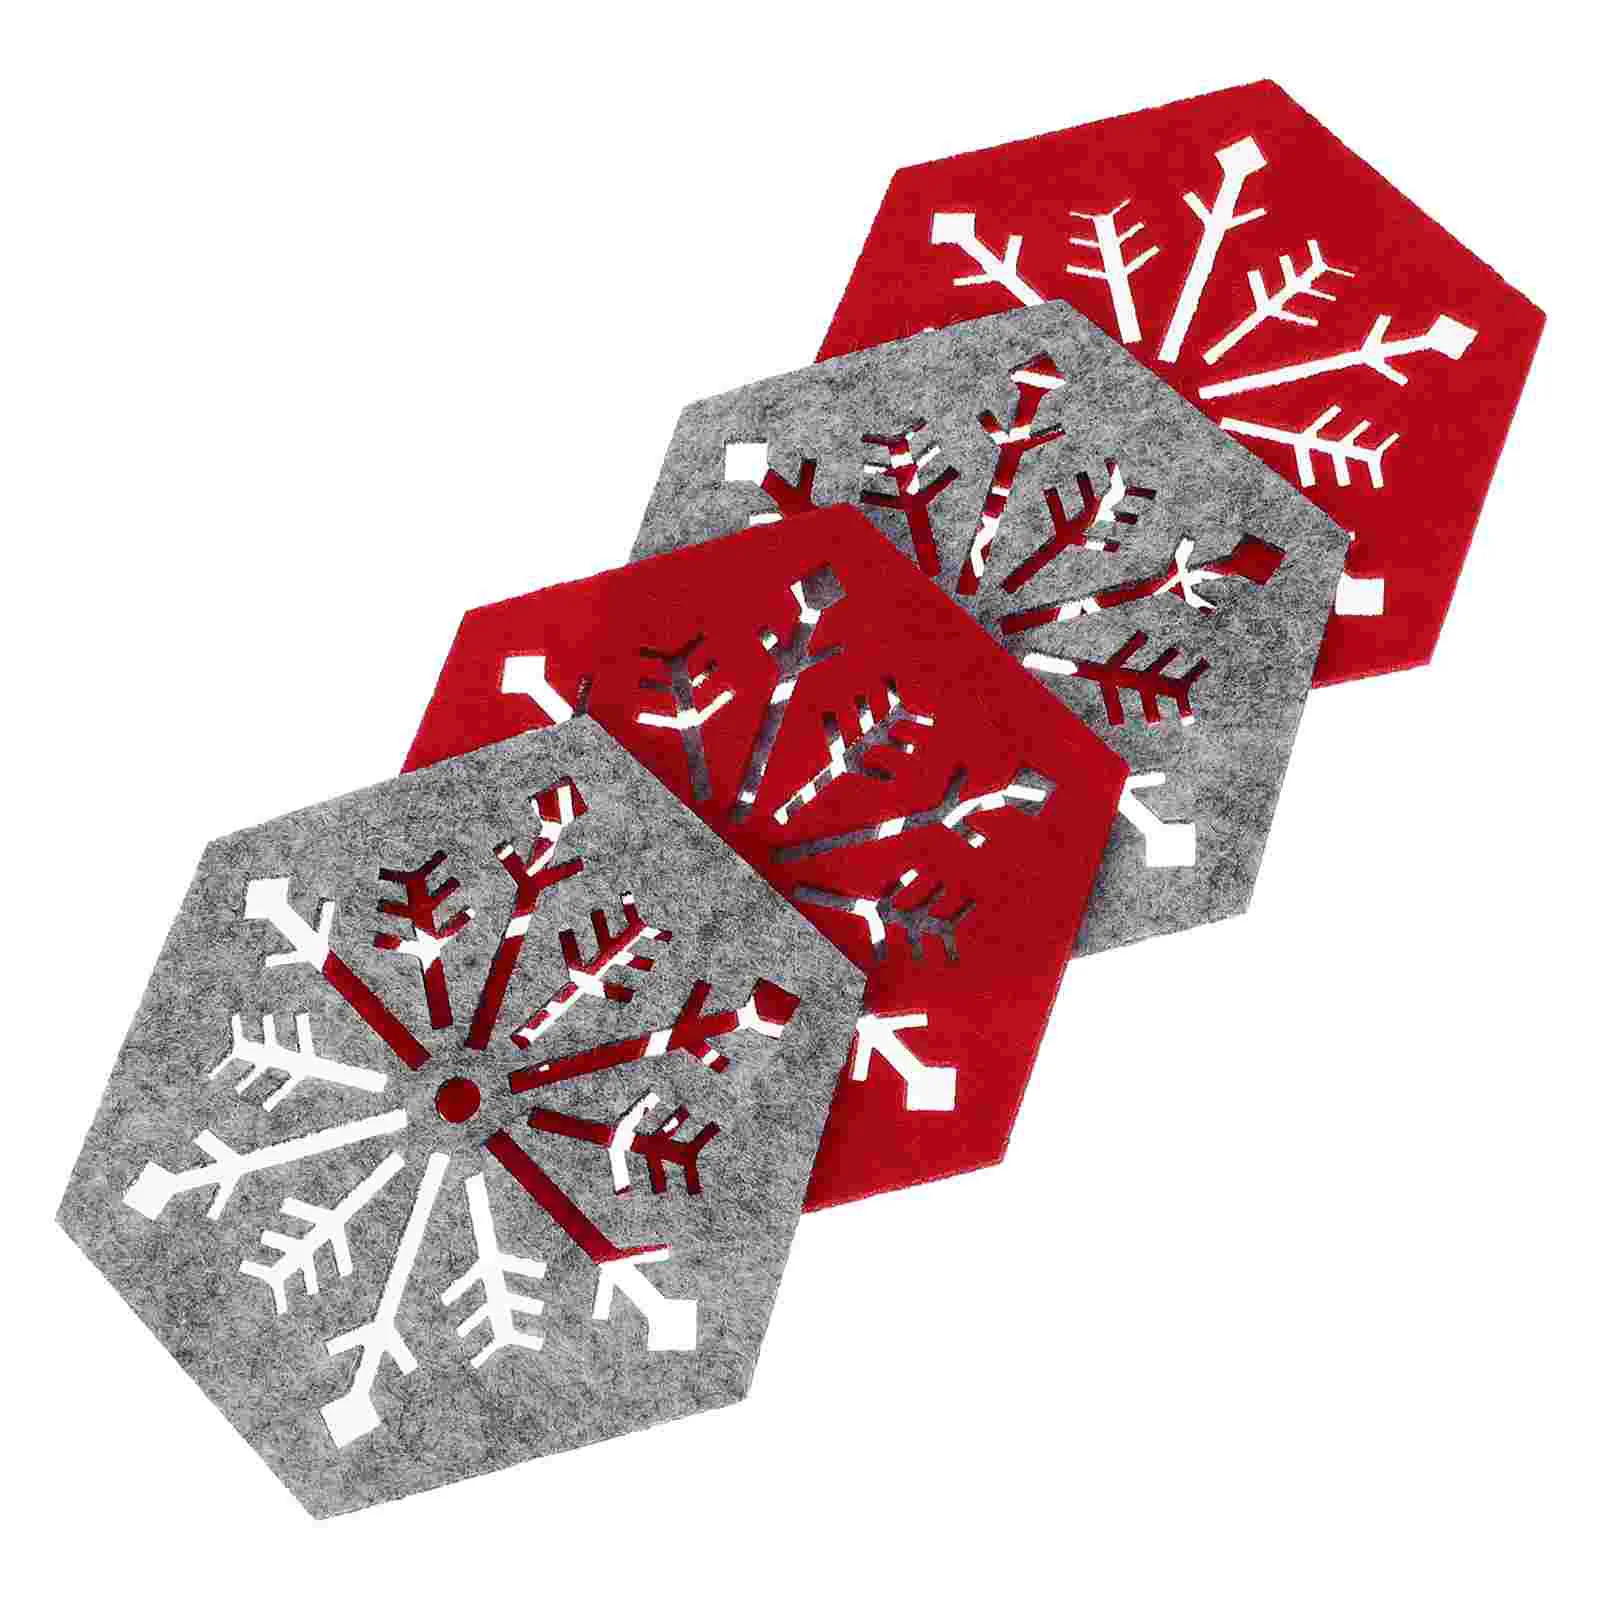 

4 Pcs Coasters Anti-skid Place Mats Heat-resistant Assorted Snowflake Pattern Table Party Dinner Placemats Christmas